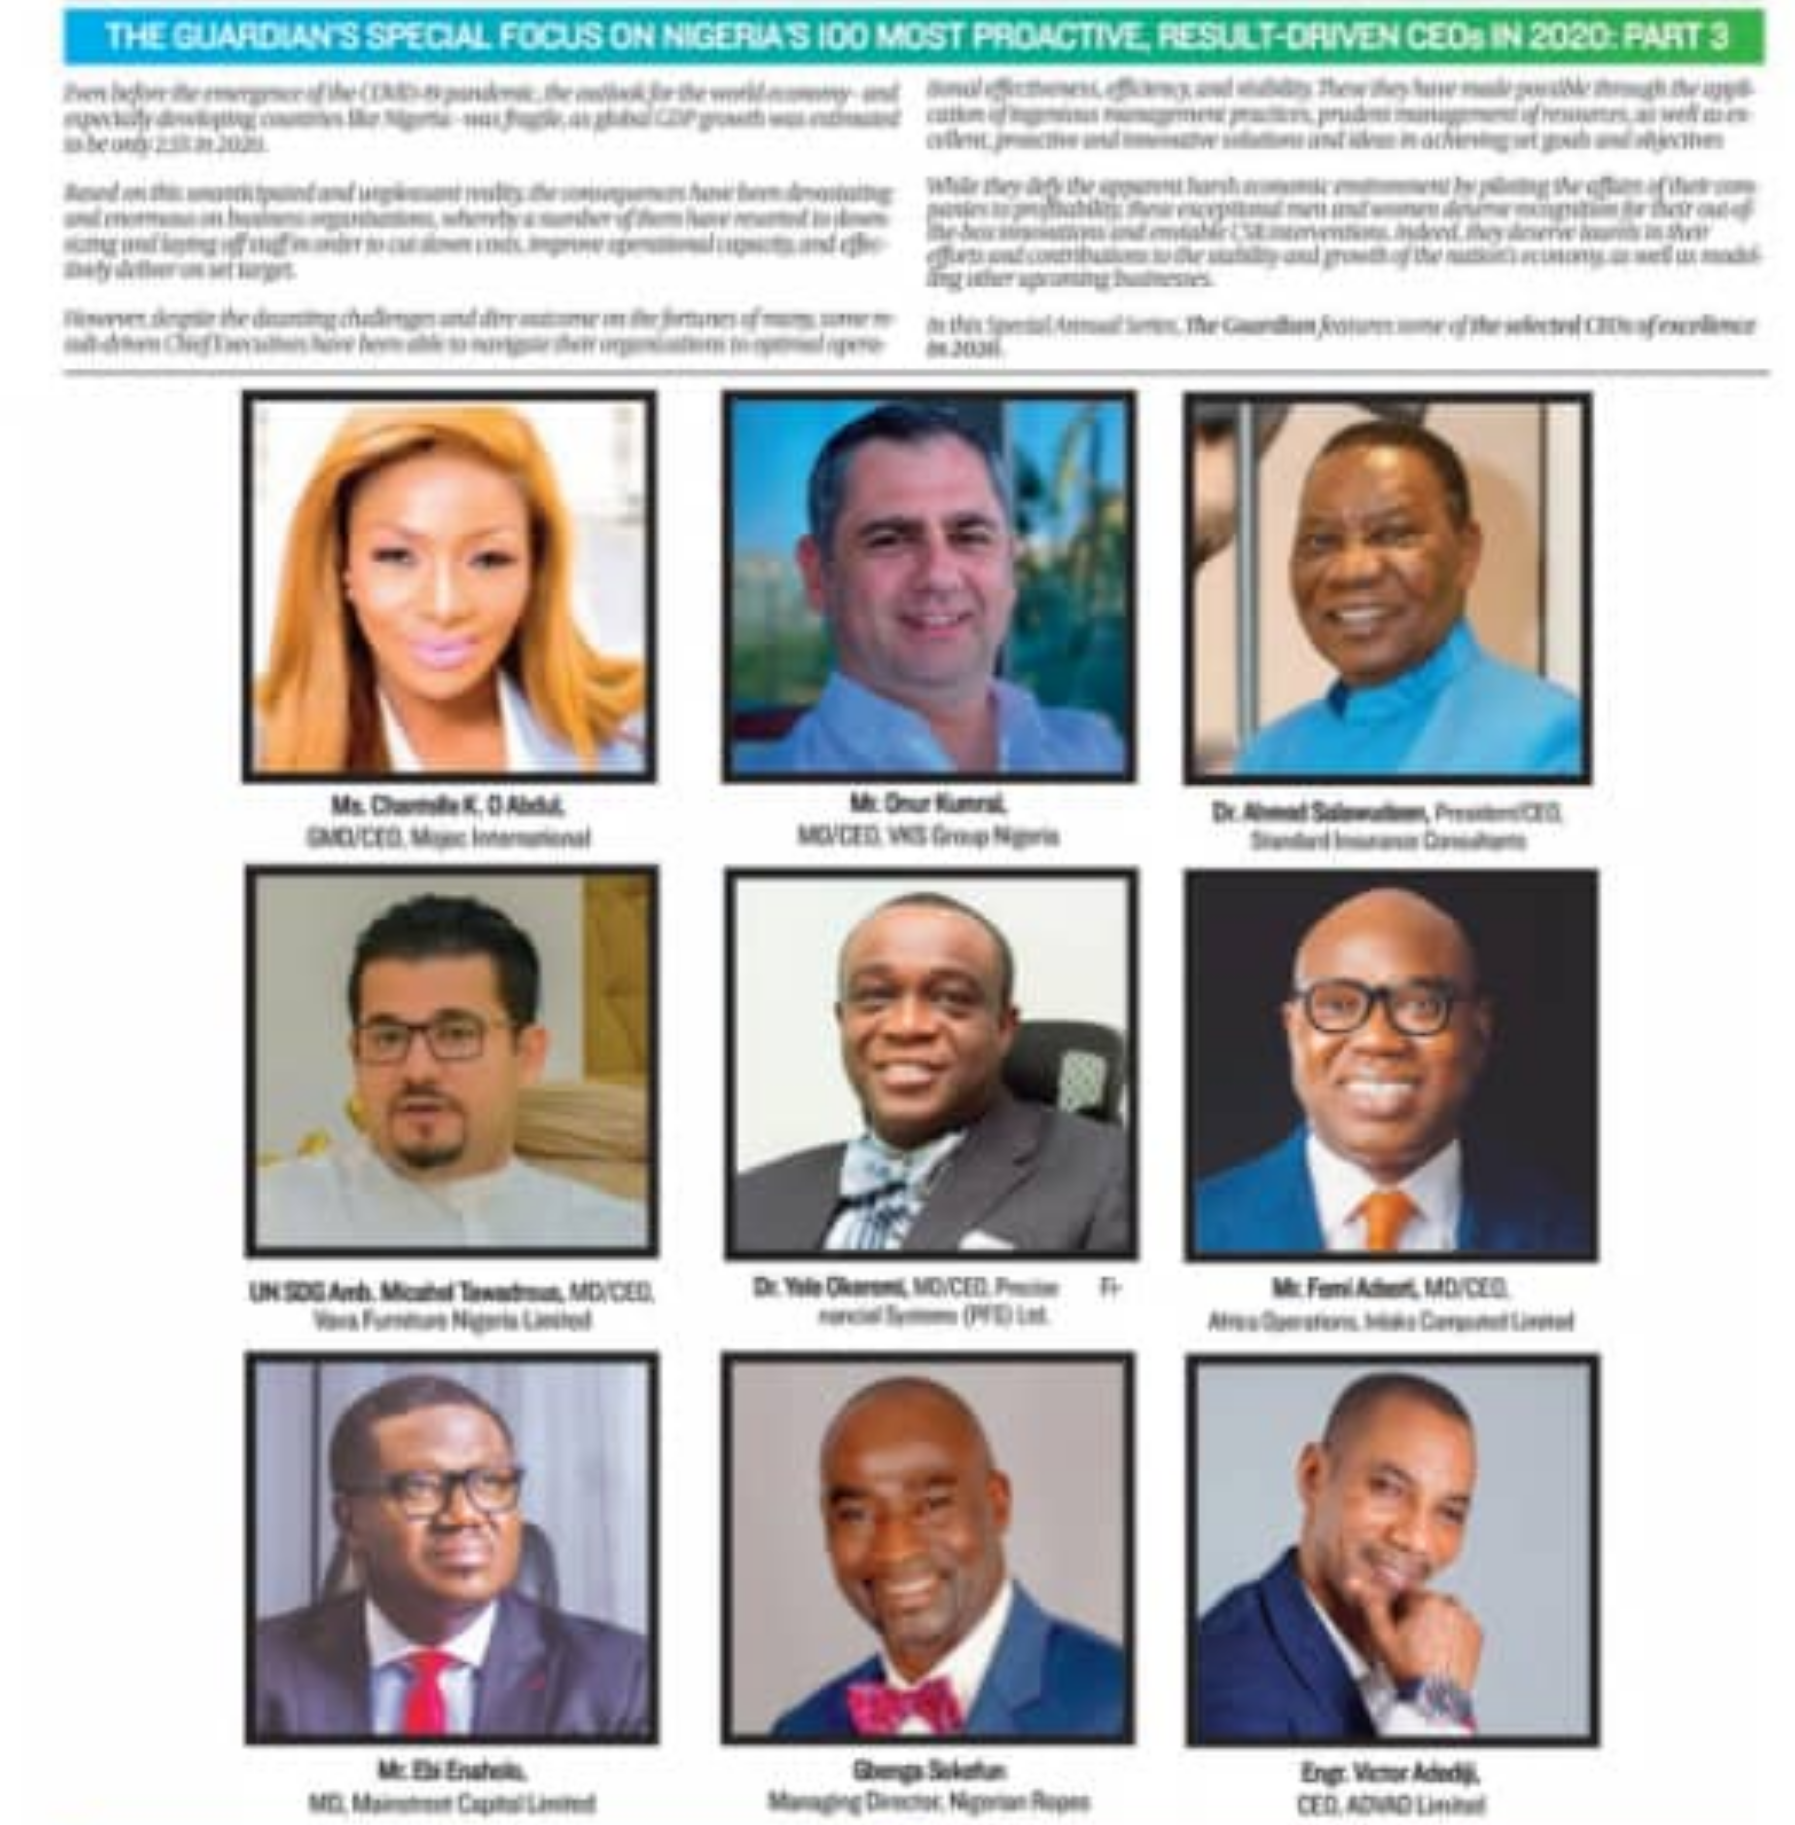 Catch Ebi Enaholos interview on Guardians Special Focus on Nigerias 100 most proactive CEO’s in 2020